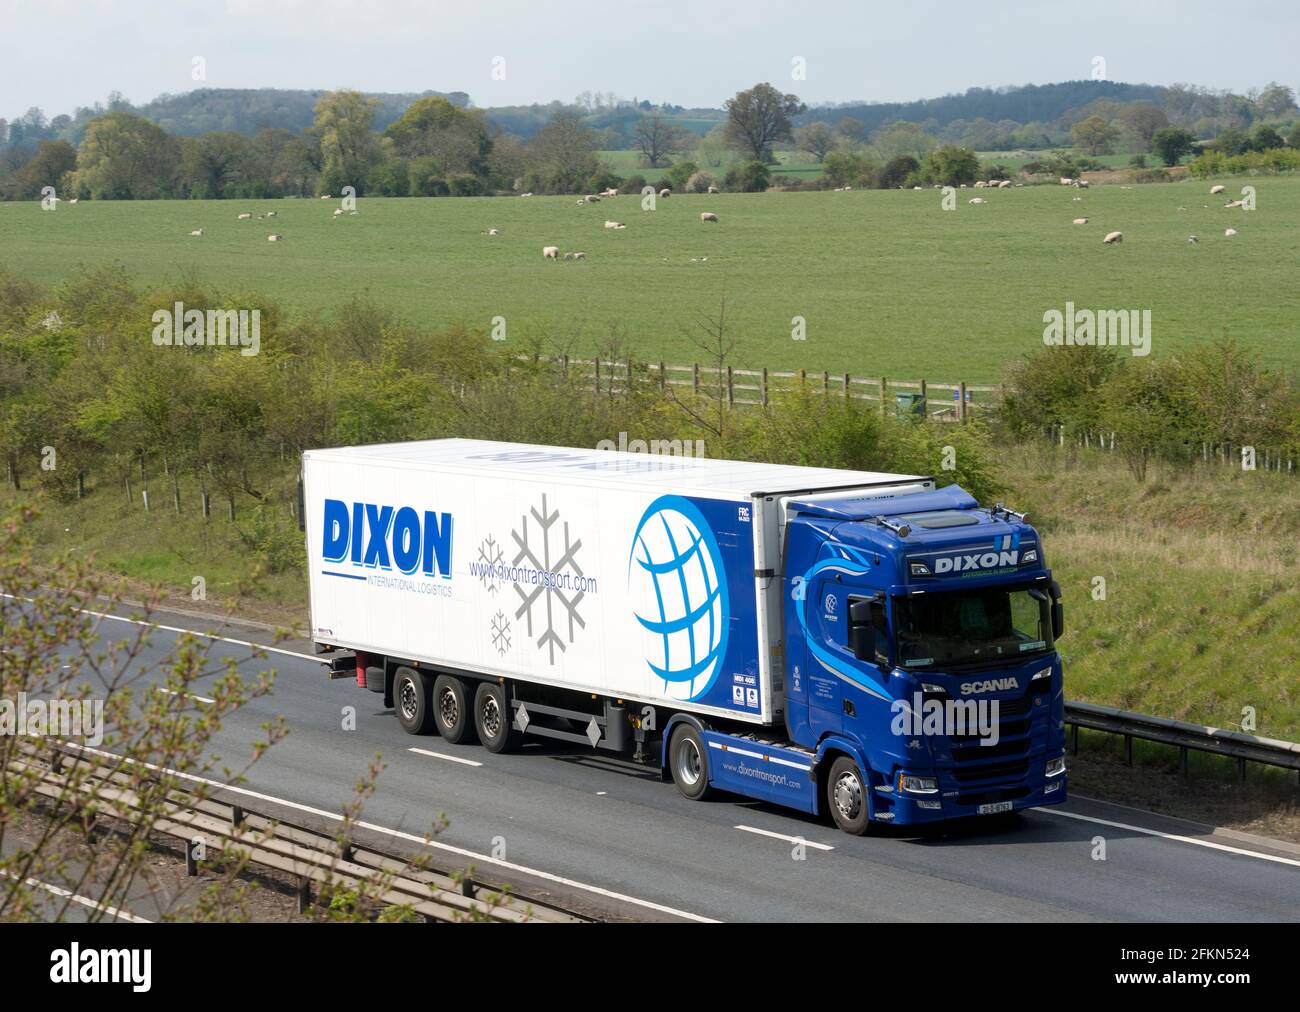 A Dixon lorry on the A46 road, Warwickshire, UK Stock Photo